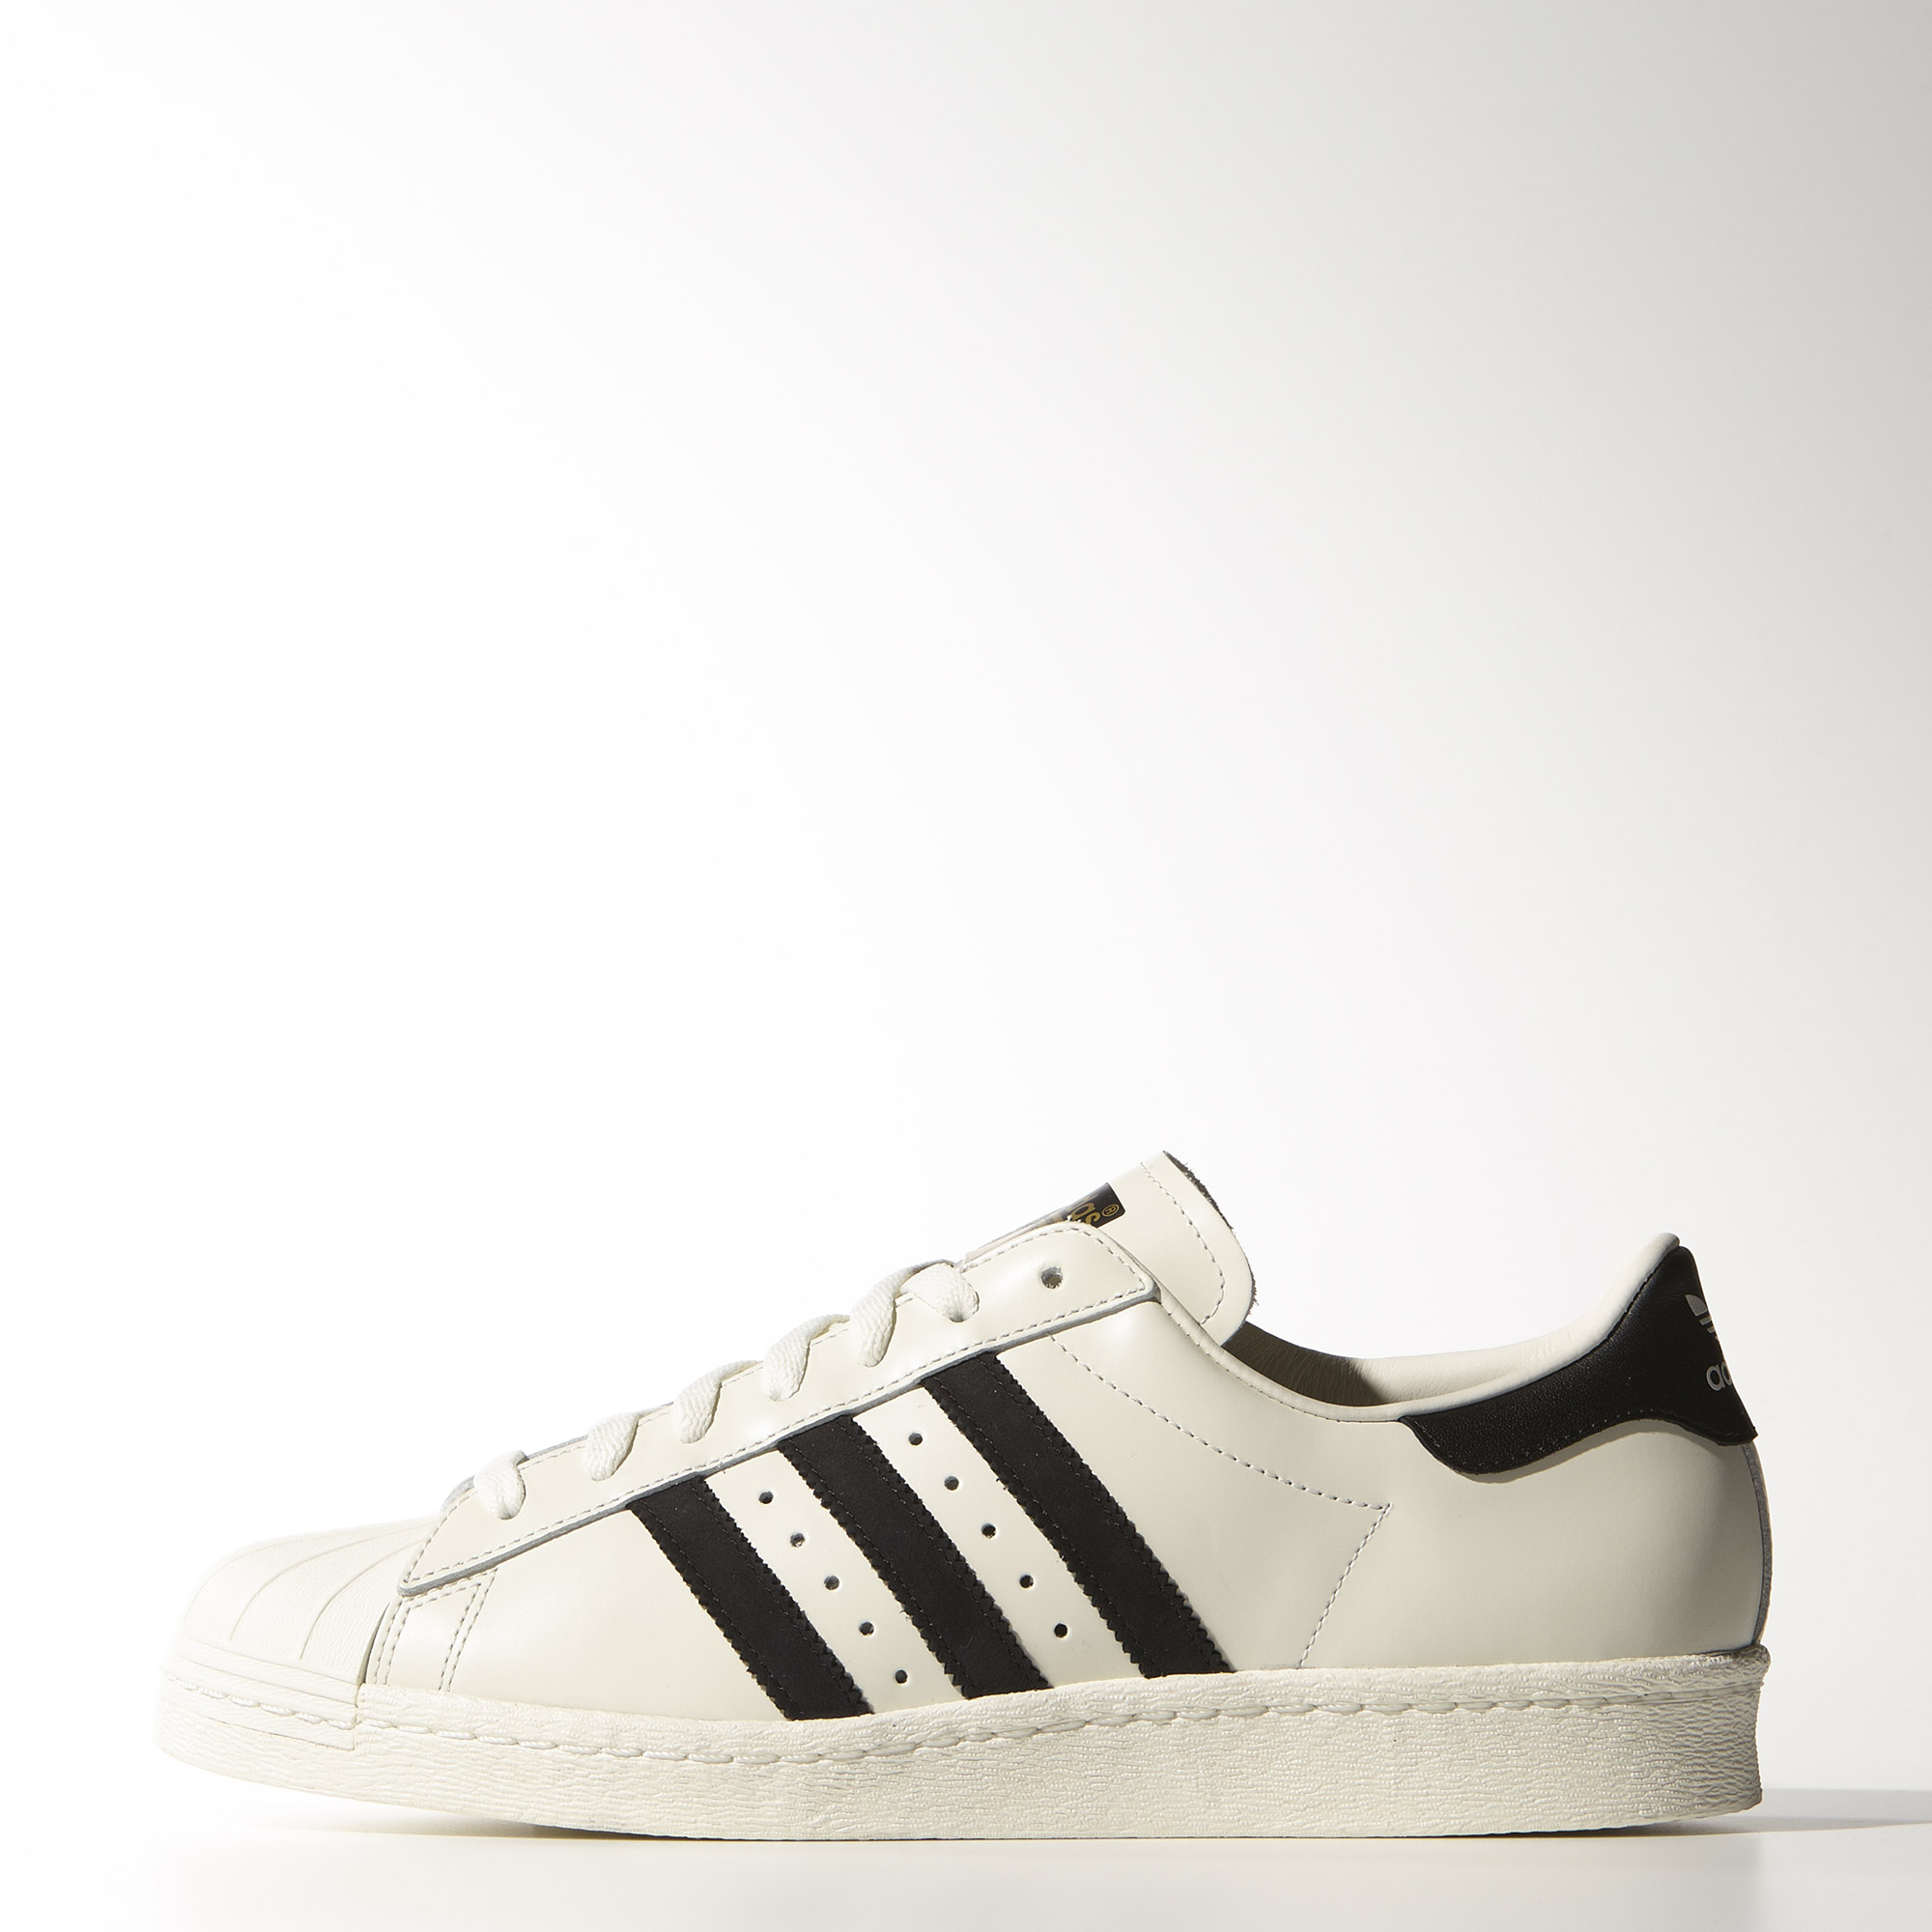 adidas chaussure superstar 80s vintage deluxe